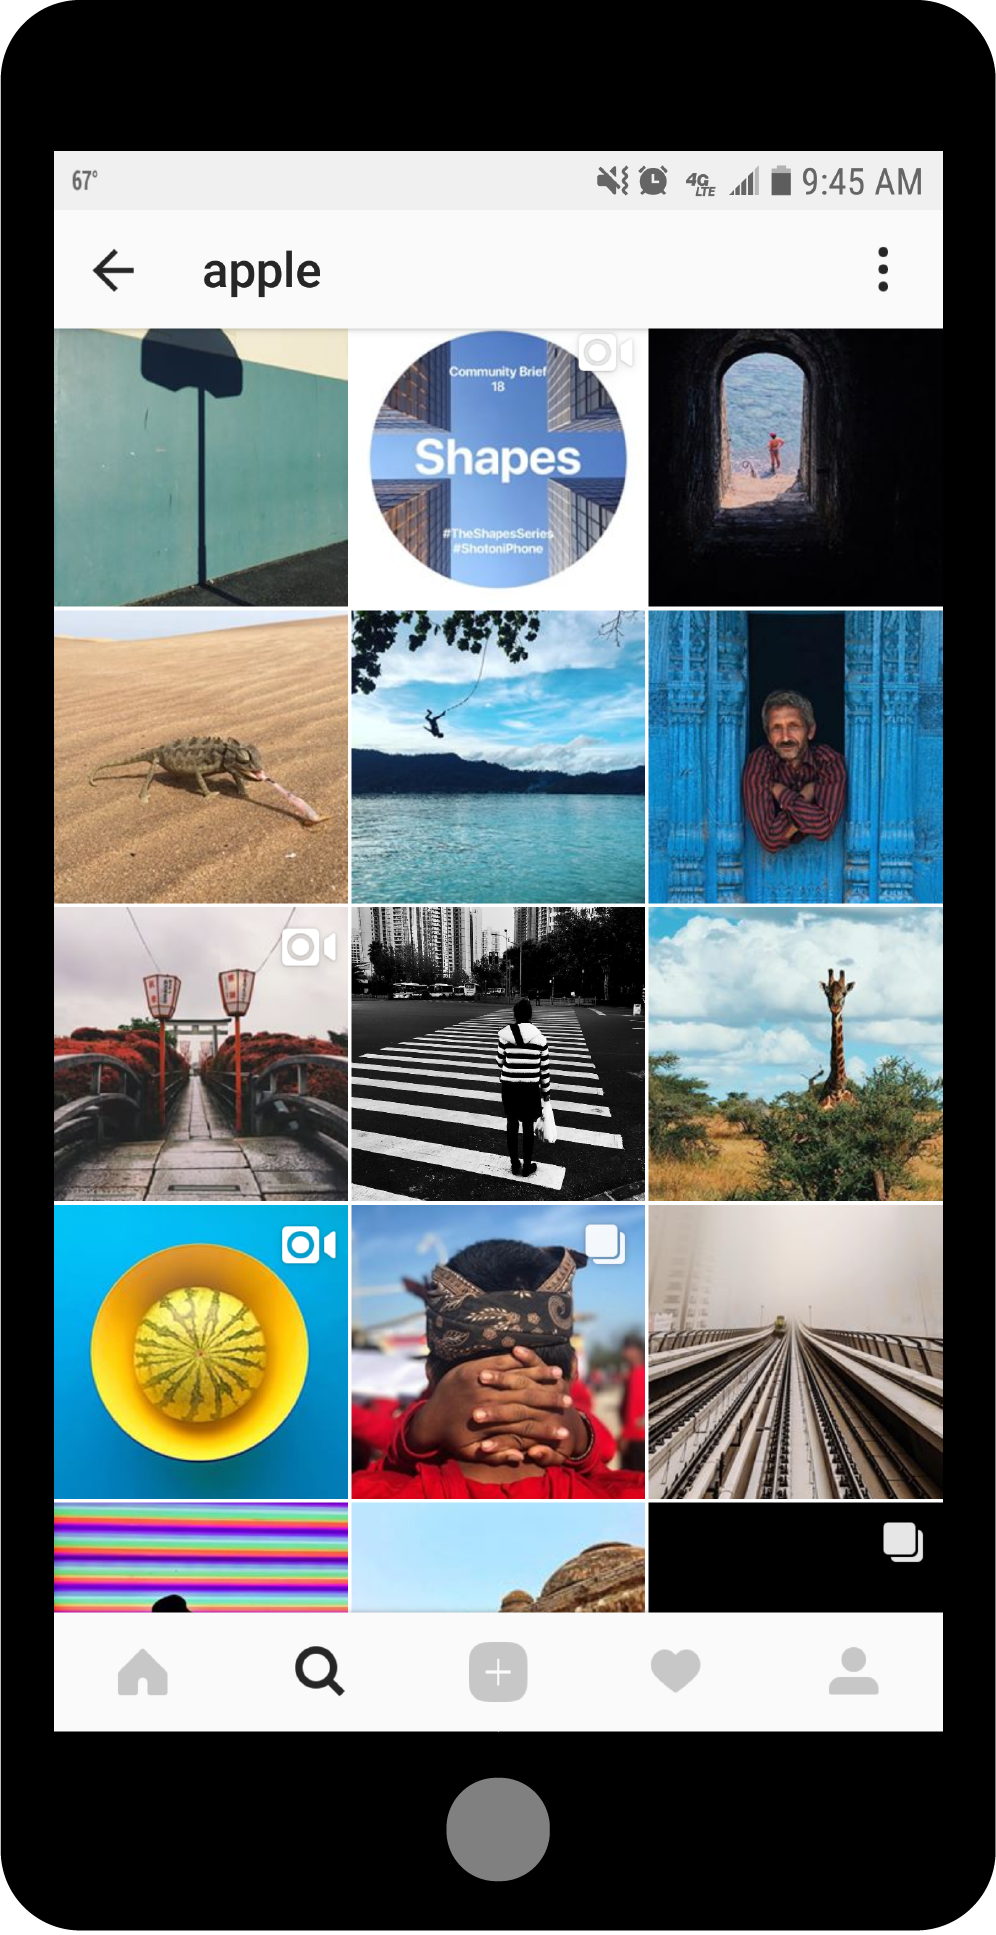 Apple’s Instagram feed features photos shot on iPhones, utilizing the branded hashtag #ShotoniPhone, which promotes the experience people can capture with Apple’s product.